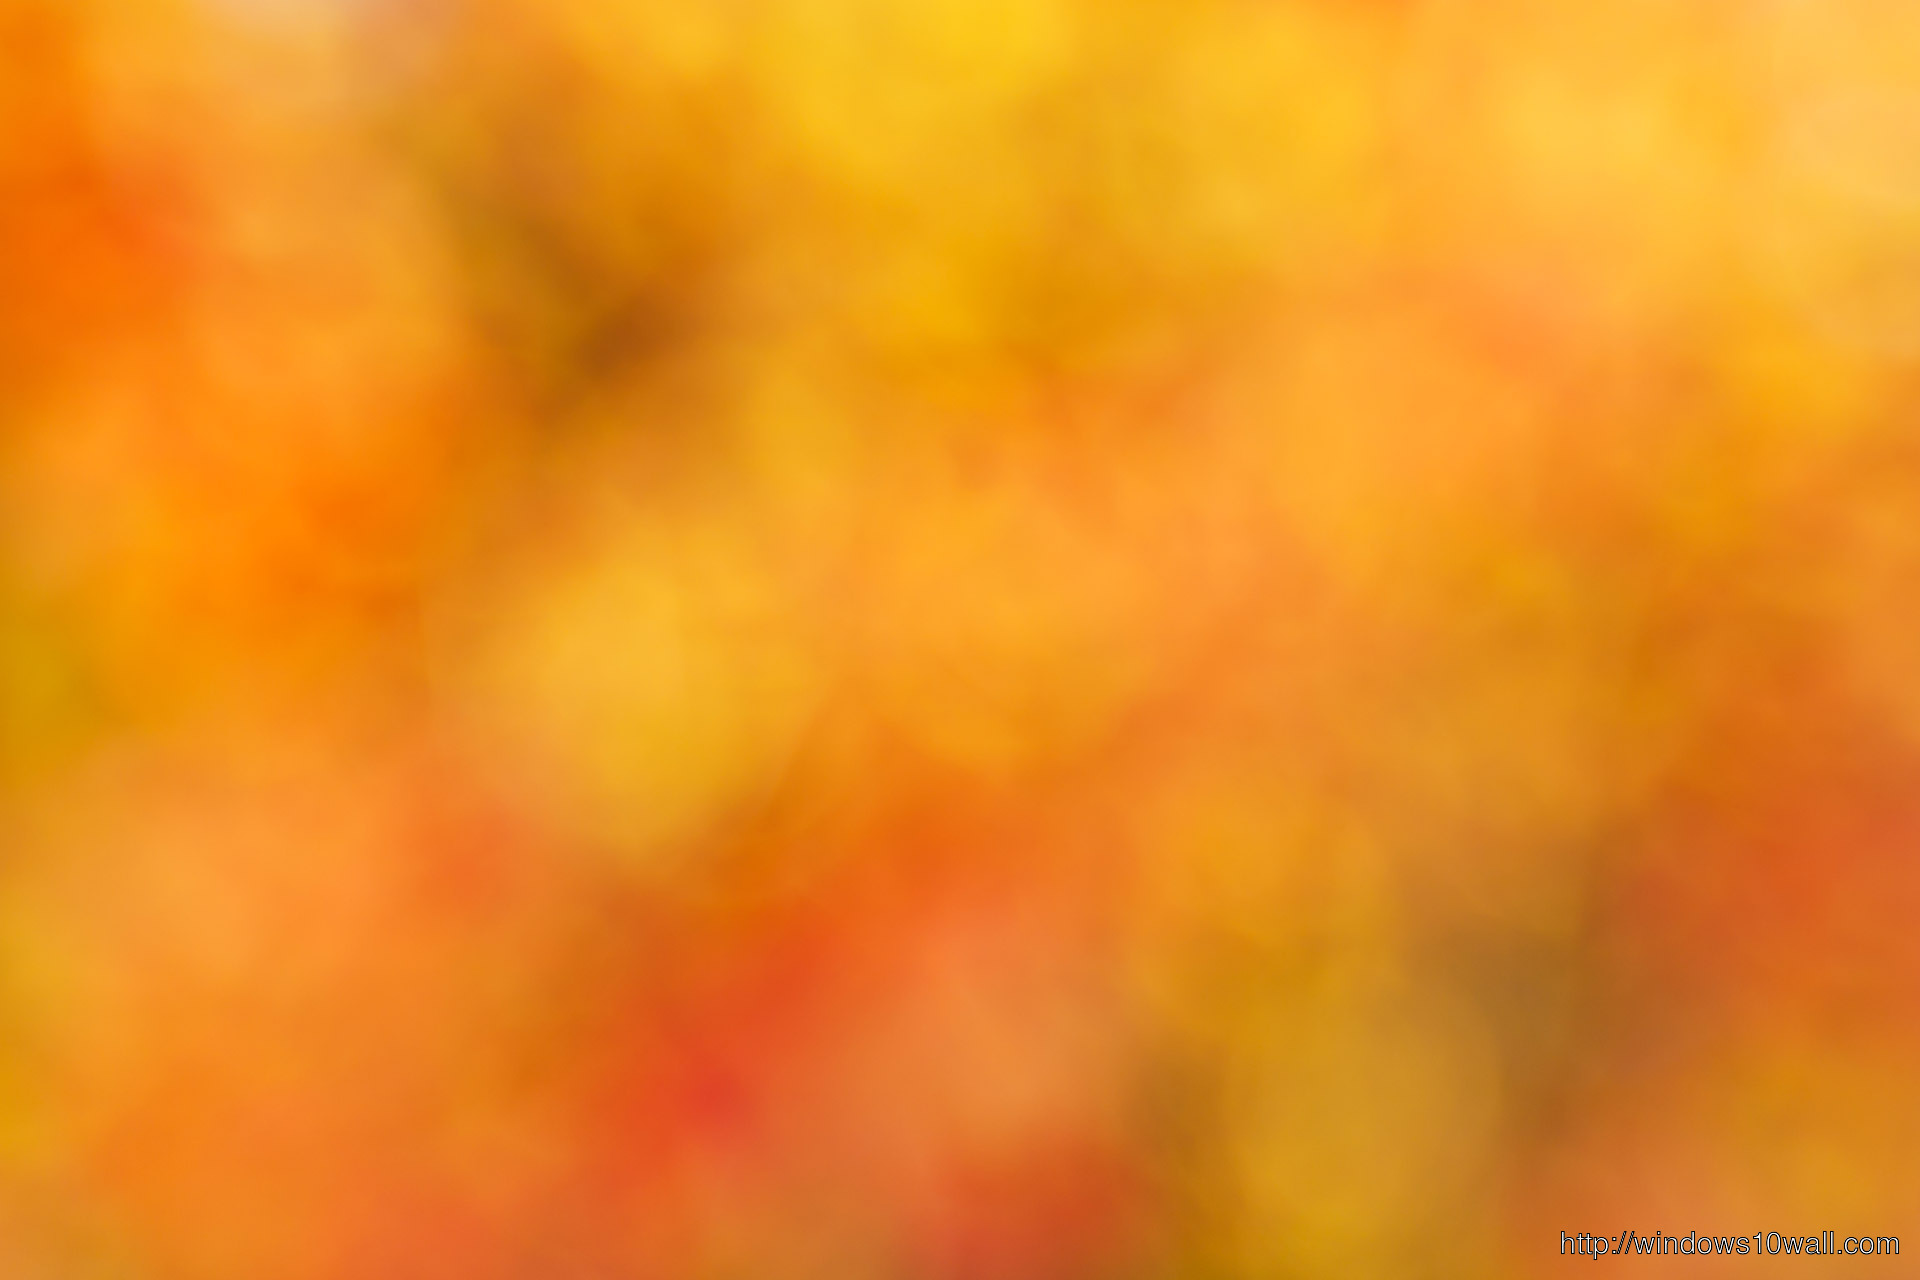 Orange Blurred Background Free Stock Photo HD - Public Domain Pictures